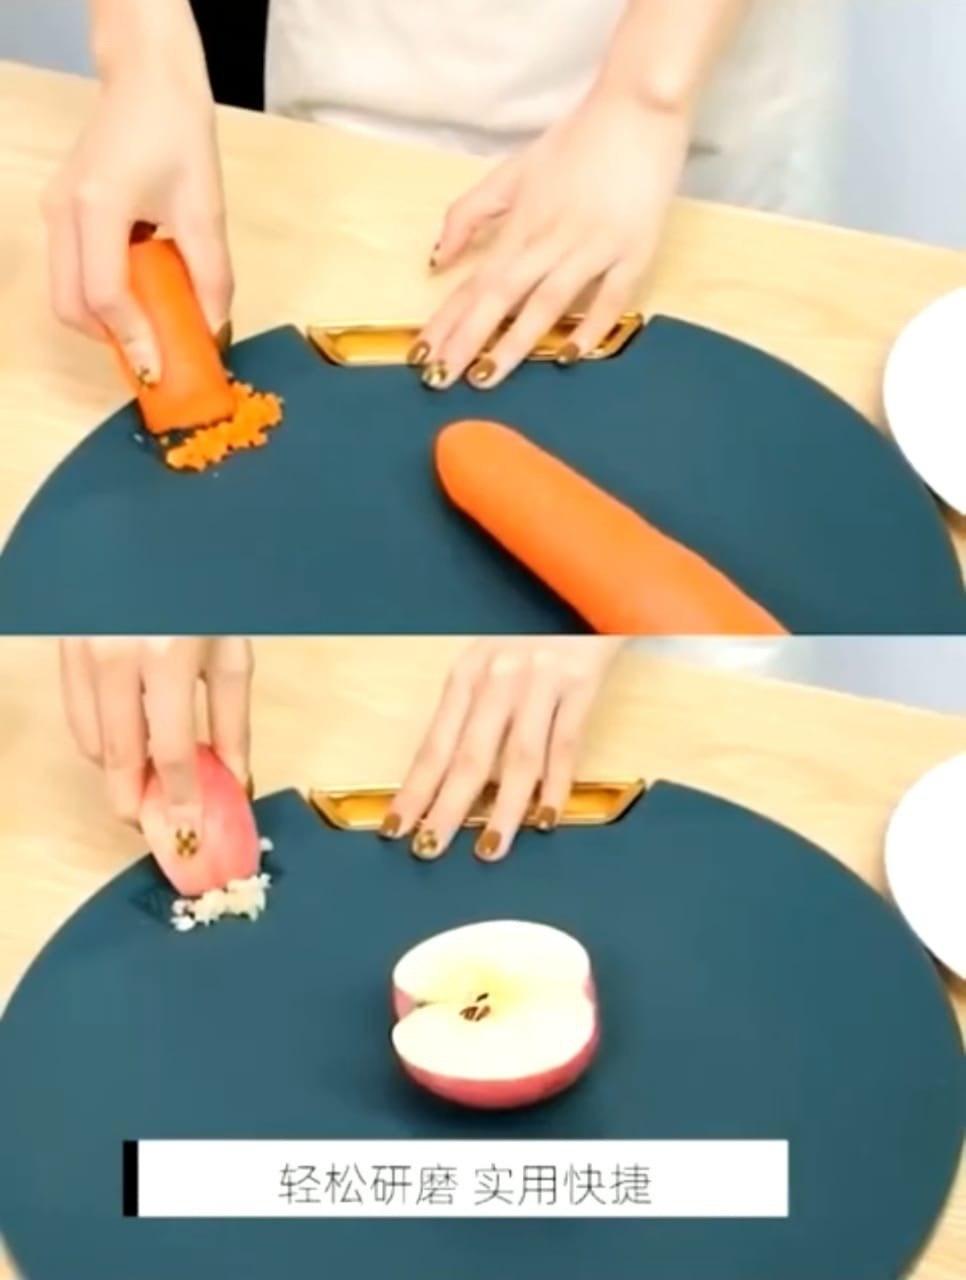 Round Revolving Chopping Board with Handle and Seperate Space for Meshing Garlic Carrot